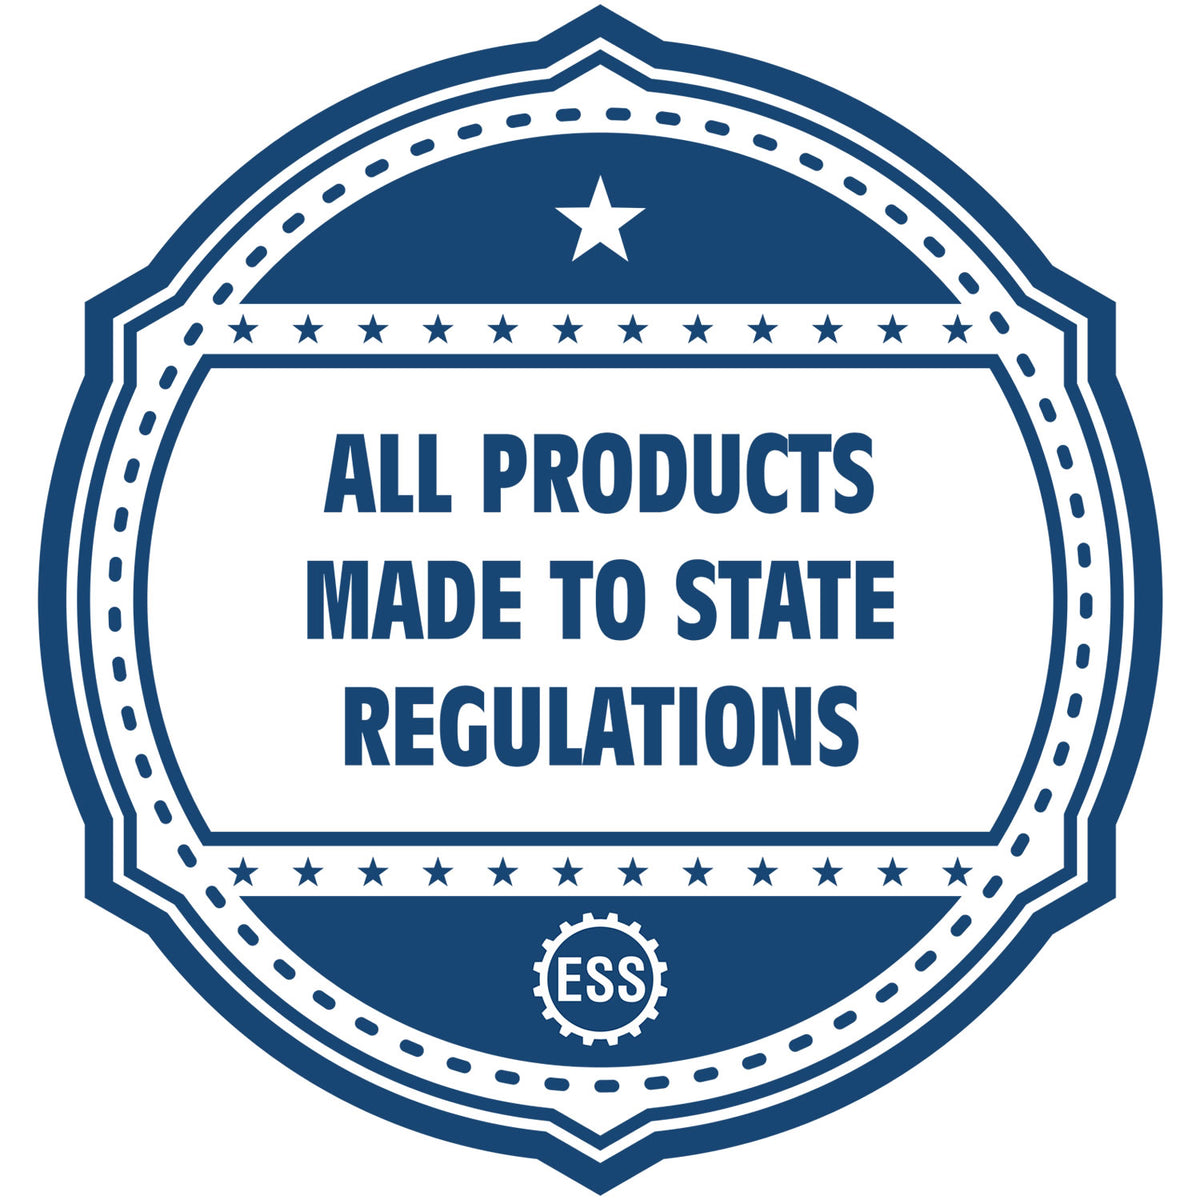 An icon or badge element for the California Professional Engineer Seal Stamp showing that this product is made in compliance with state regulations.